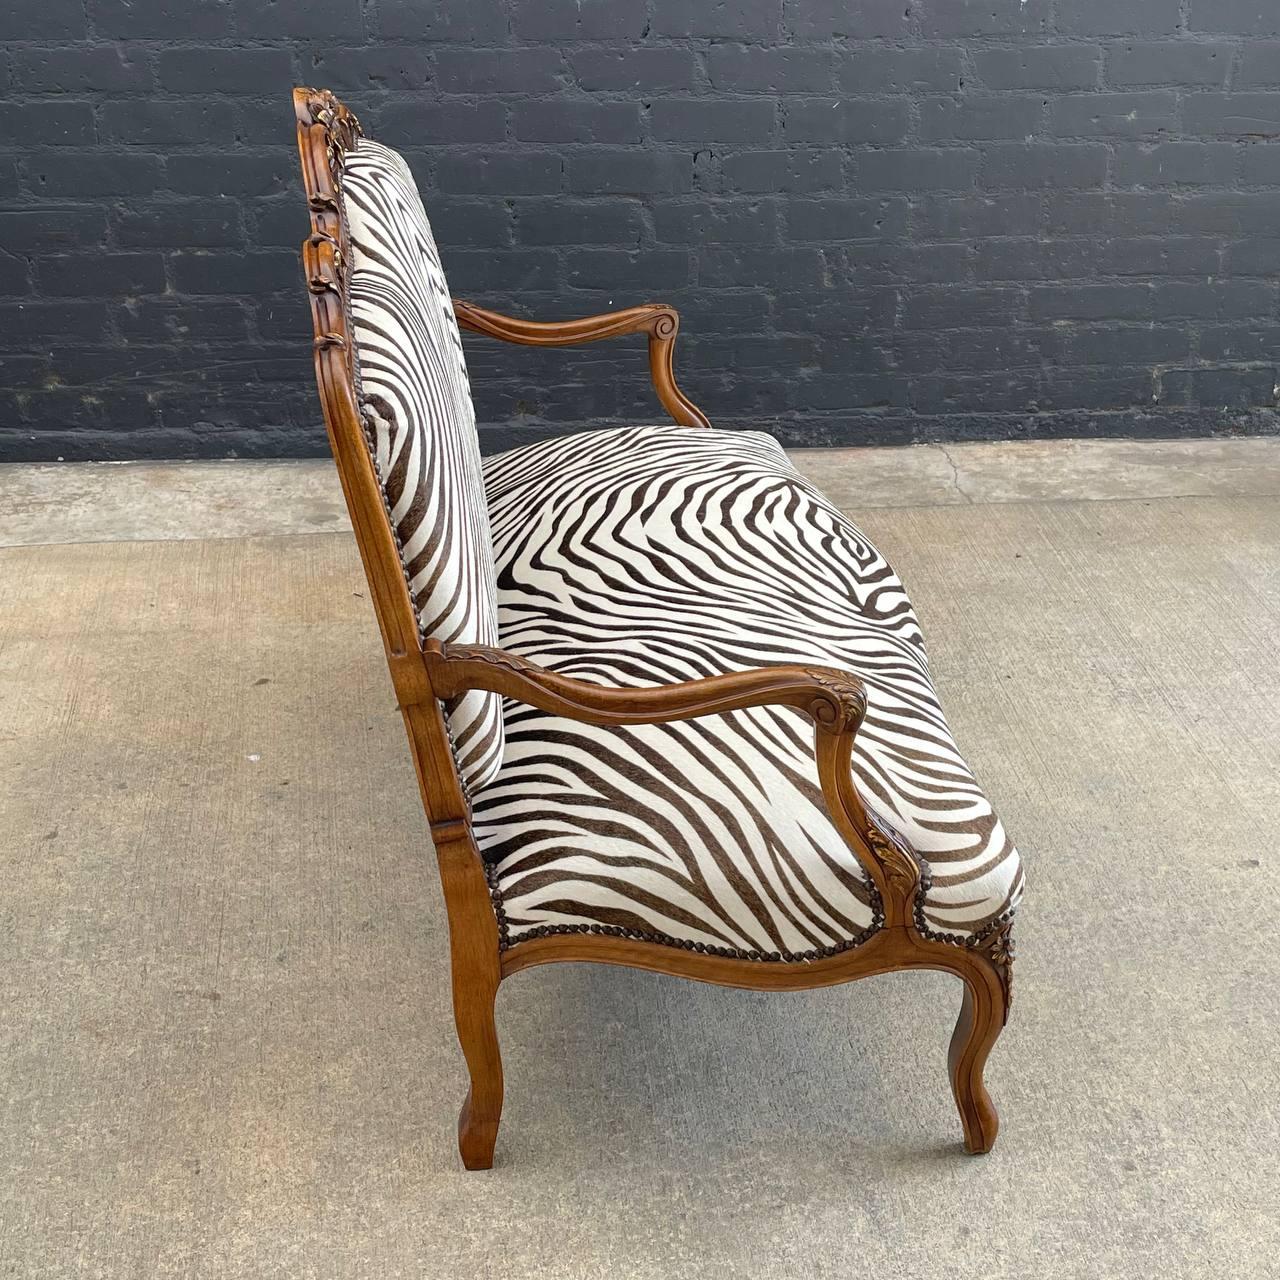 Early 20th Century Antique French Louis XVI Carved Wood & Faux Zebra Leather Sofa For Sale